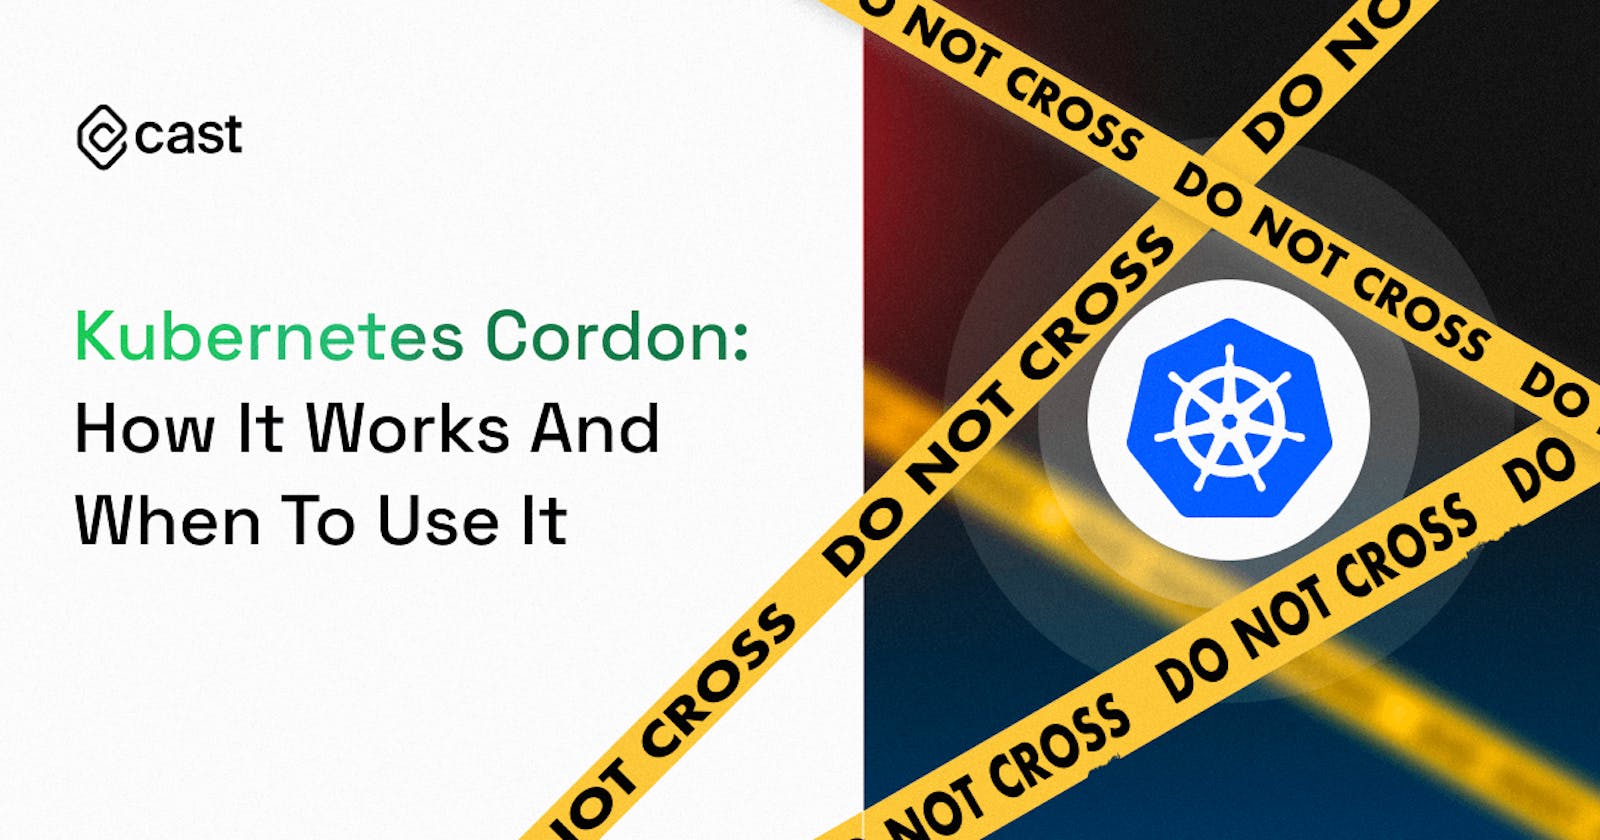 Kubernetes Cordon: How It Works And When To Use It